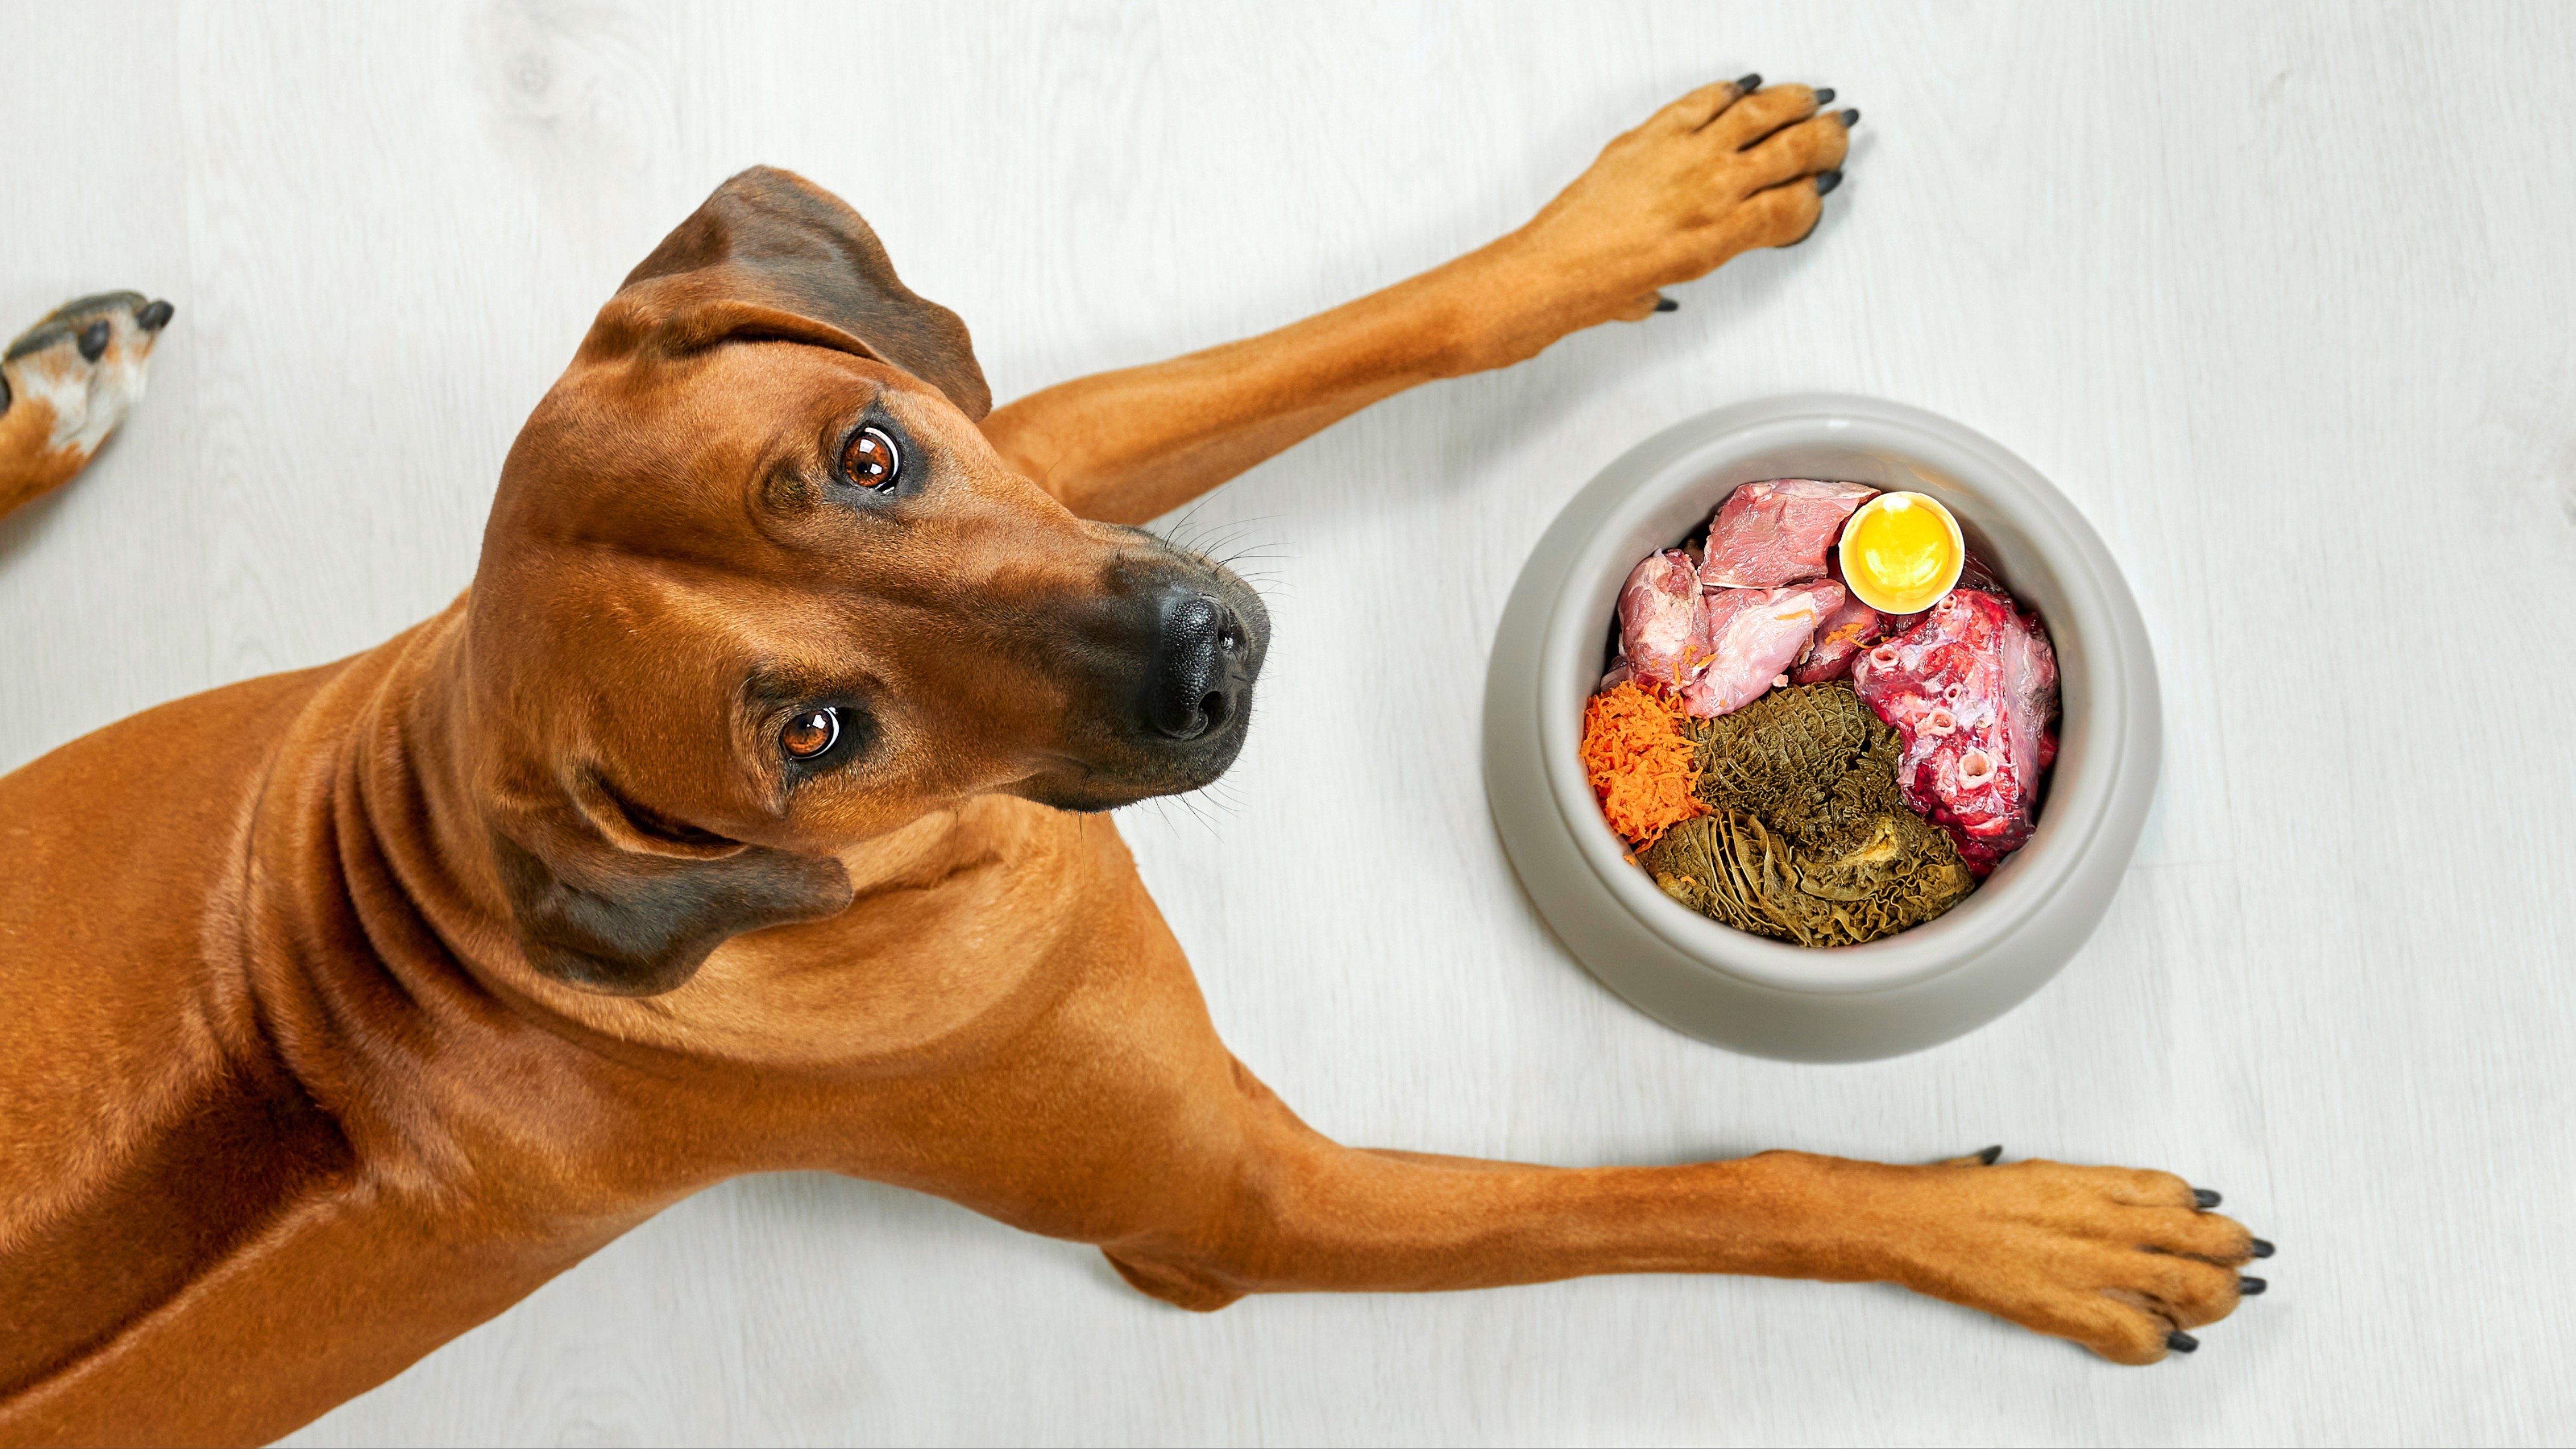 Is your dog a picky eater? Expert shares three reasons why your pup may be off their food (and how to coax them back to their bowl)